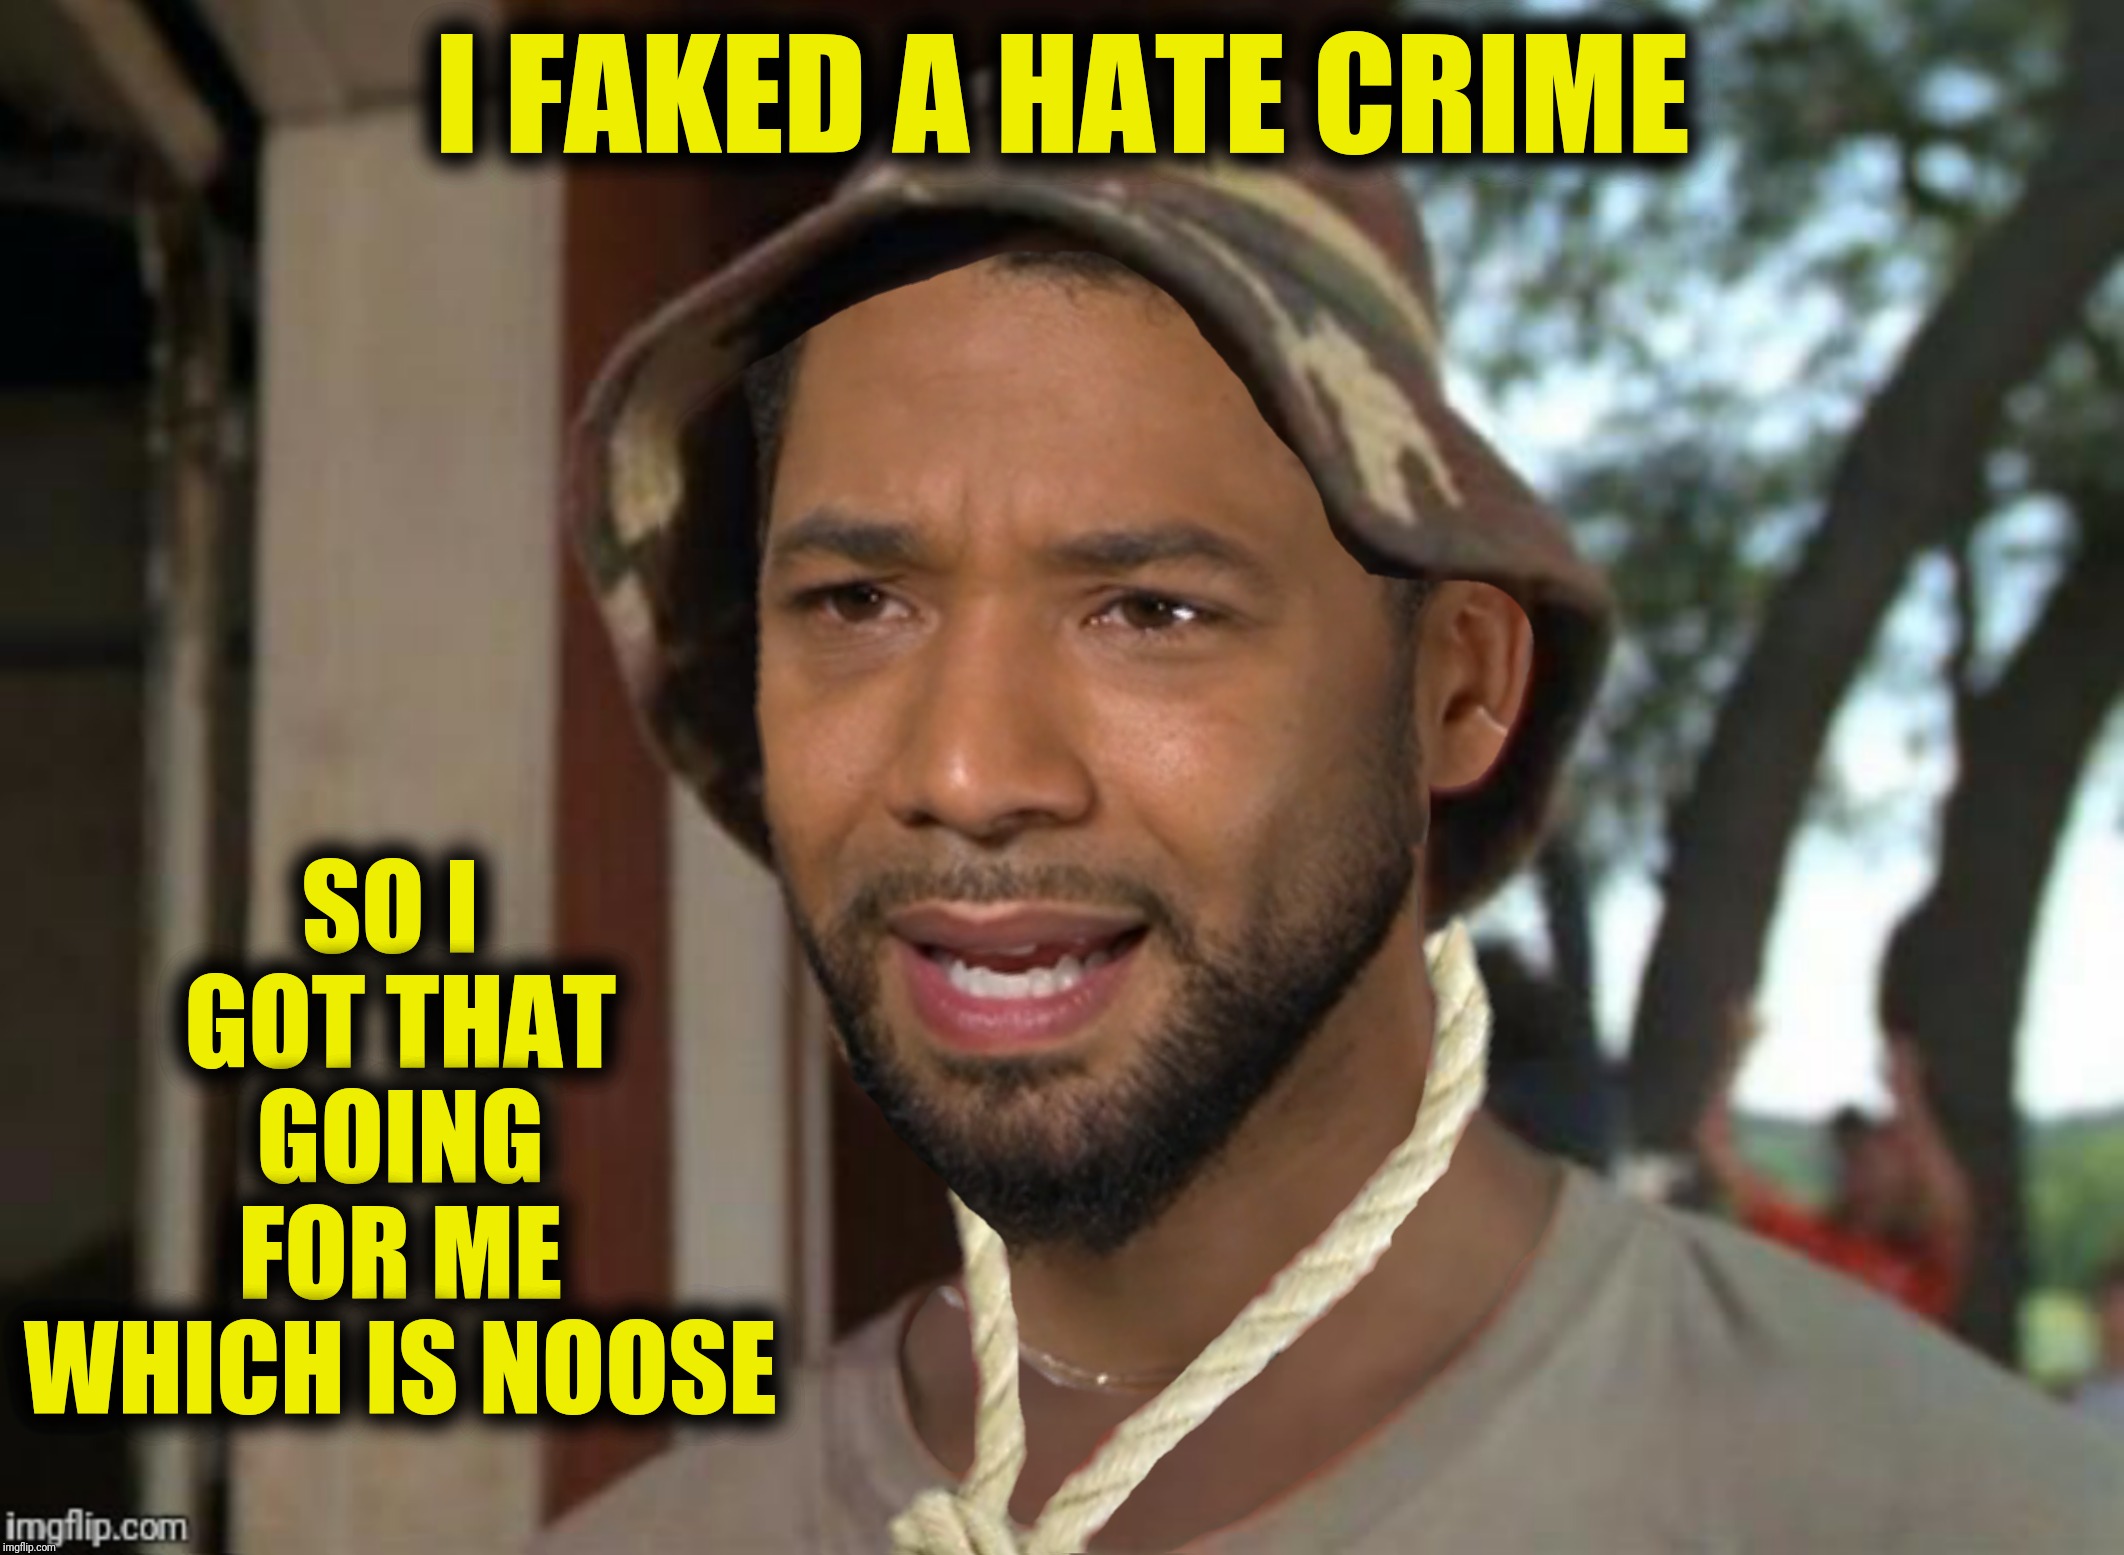 The face you make when you really are that stupid | I FAKED A HATE CRIME; SO I GOT THAT GOING FOR ME WHICH IS NOOSE | image tagged in caddyshack,jussie smollett,noose | made w/ Imgflip meme maker